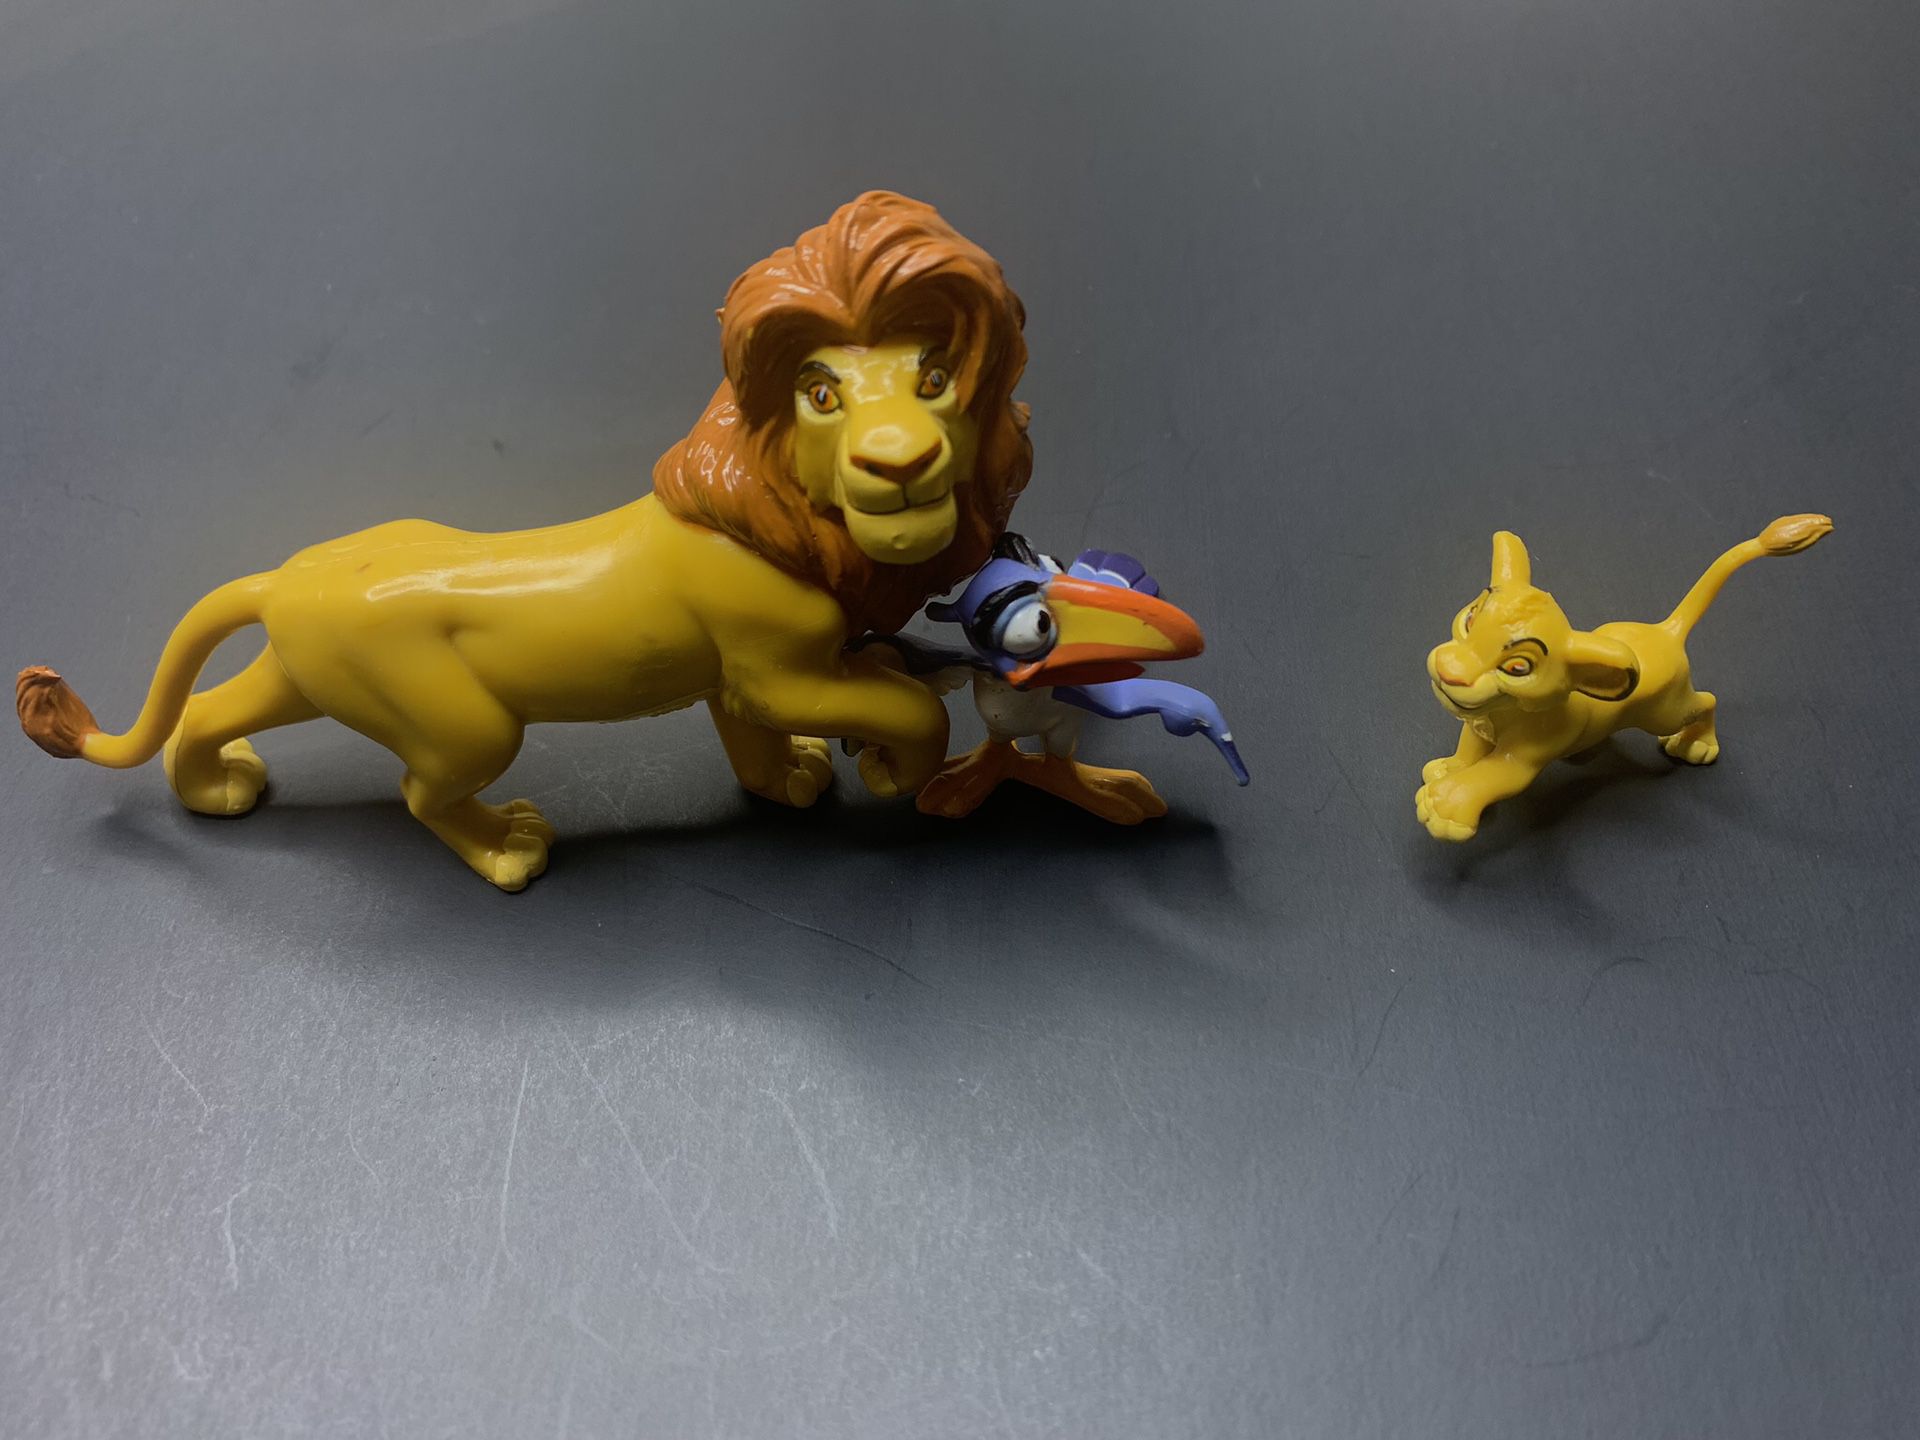 The Lion King Figurines